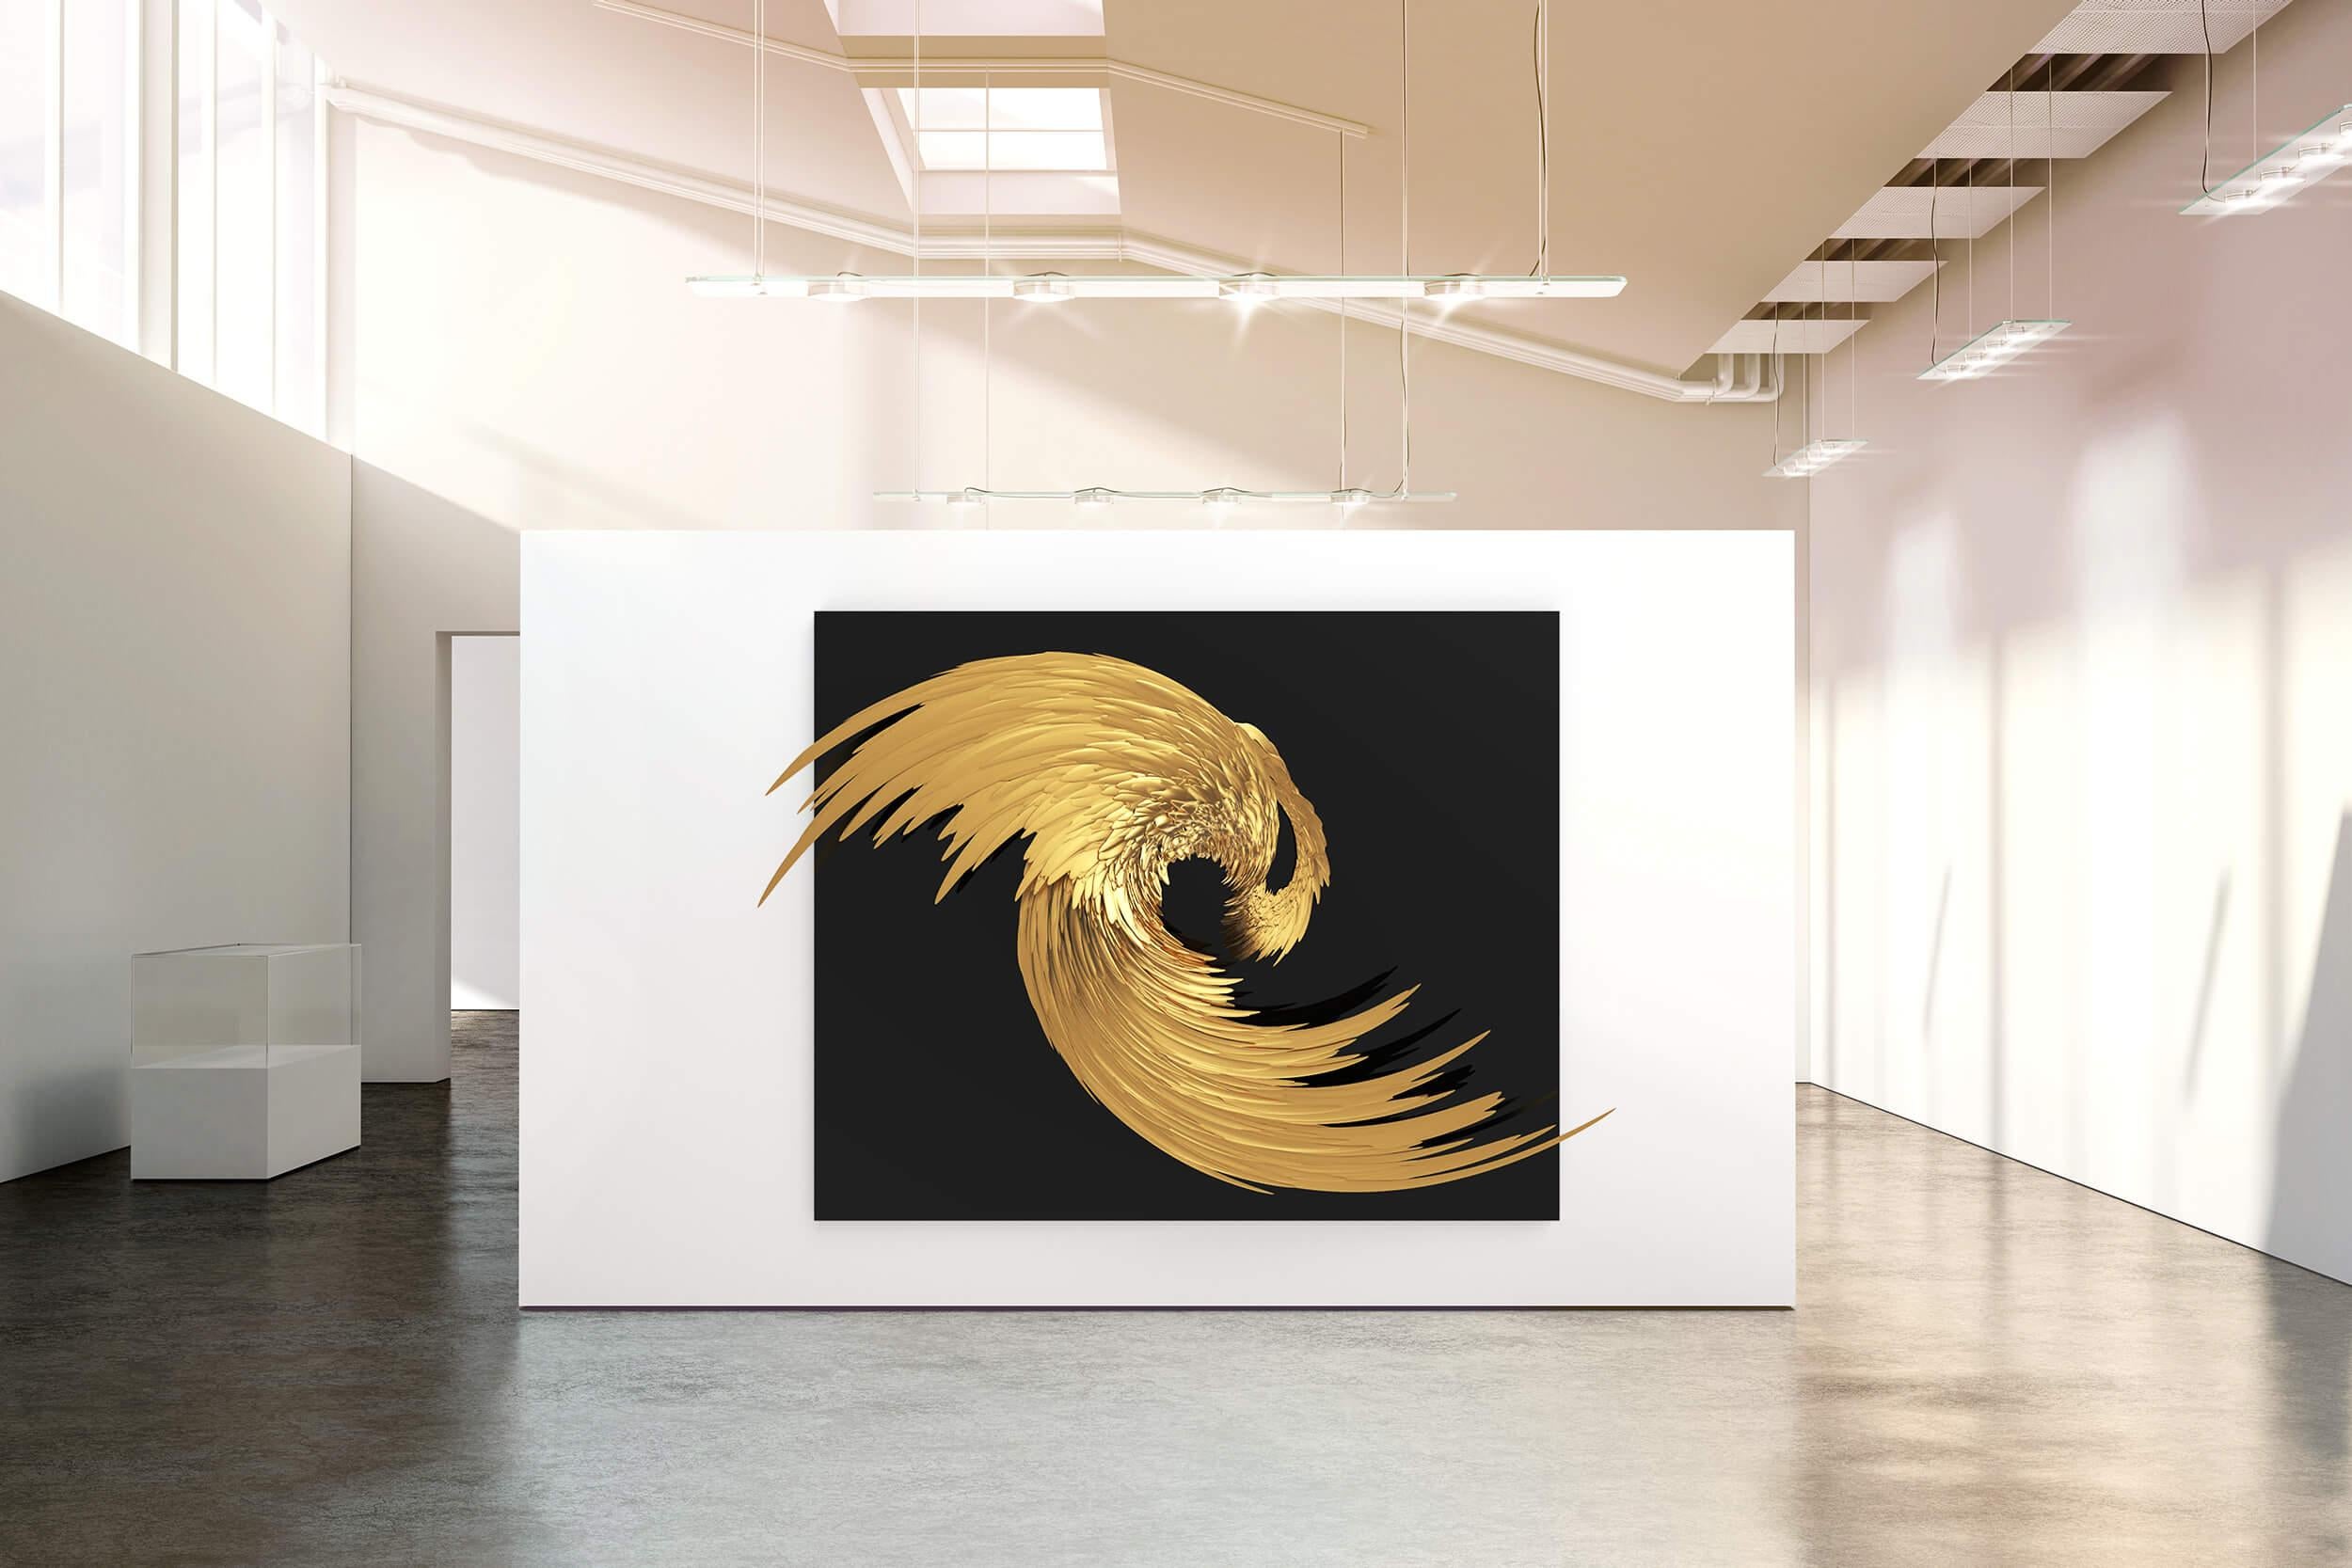 Spiritus from the Inferno collection is a transcendent work, a soaring composition that captures the essence of uplift and ascension. This wall sculpture, a part of the studio's pursuit of capturing the ephemeral transmutation of spirit into solid